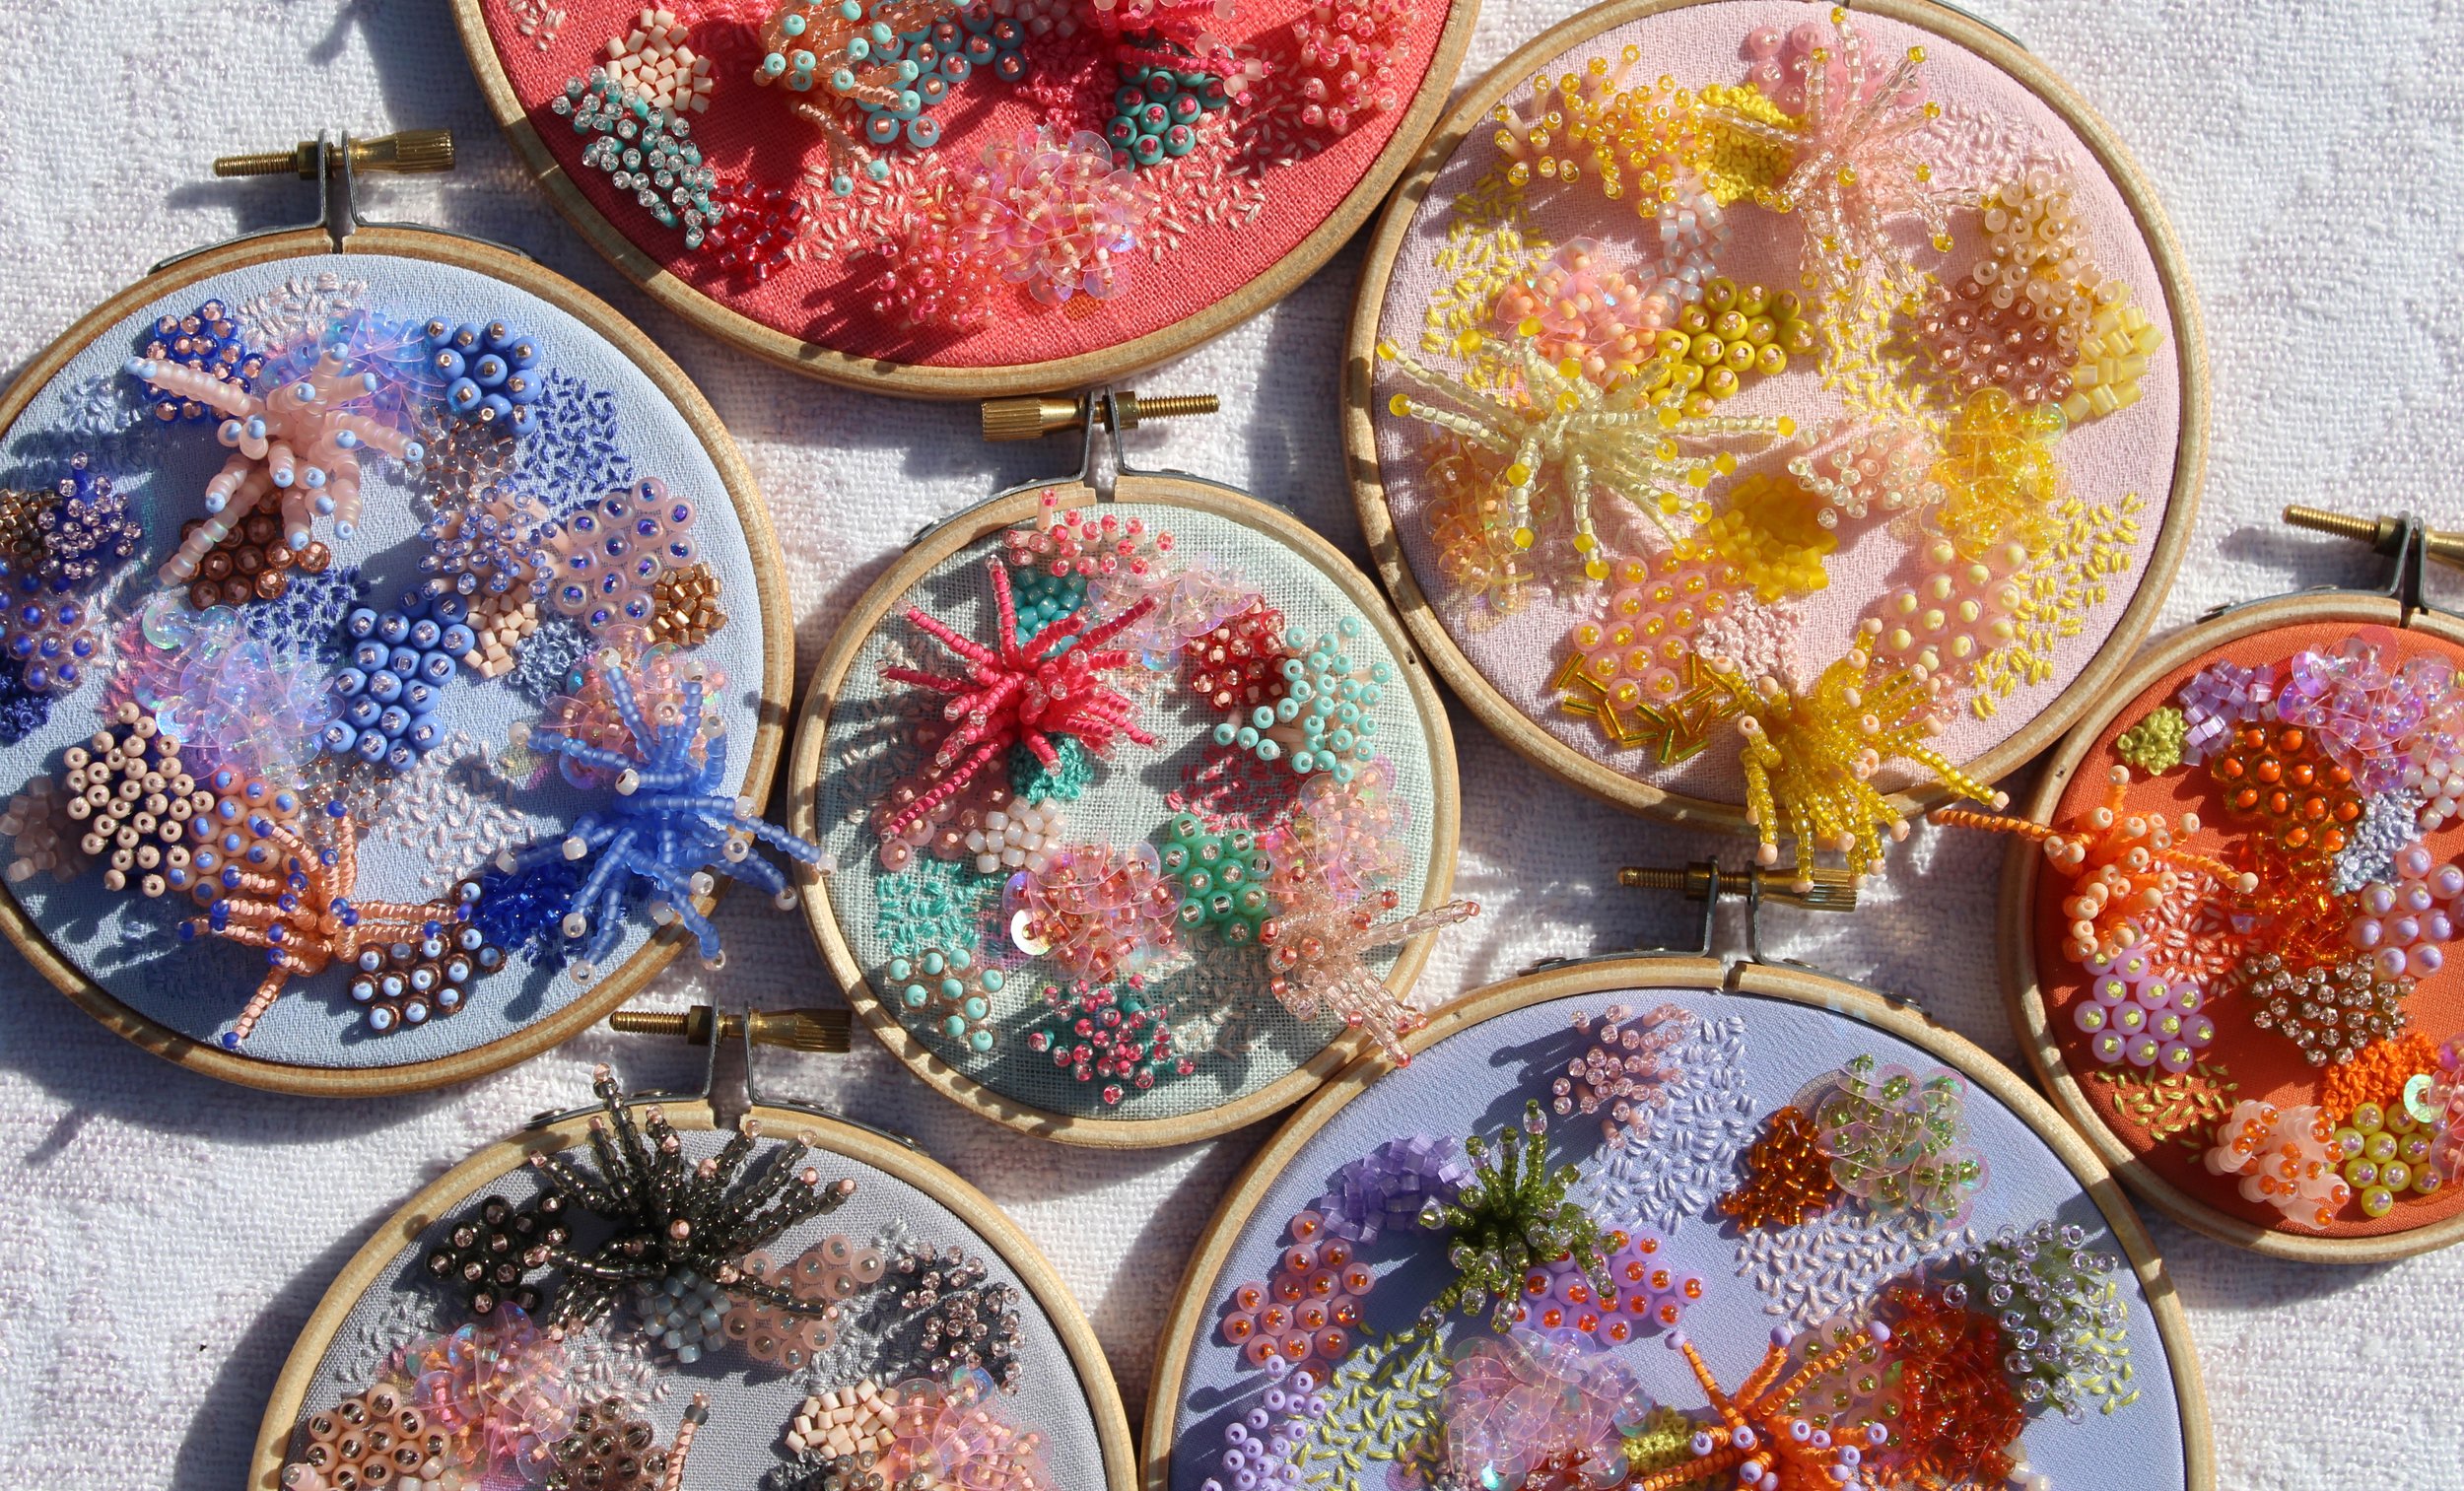 Start Making Bead Embroidery Art With Supplies + Helpful Videos